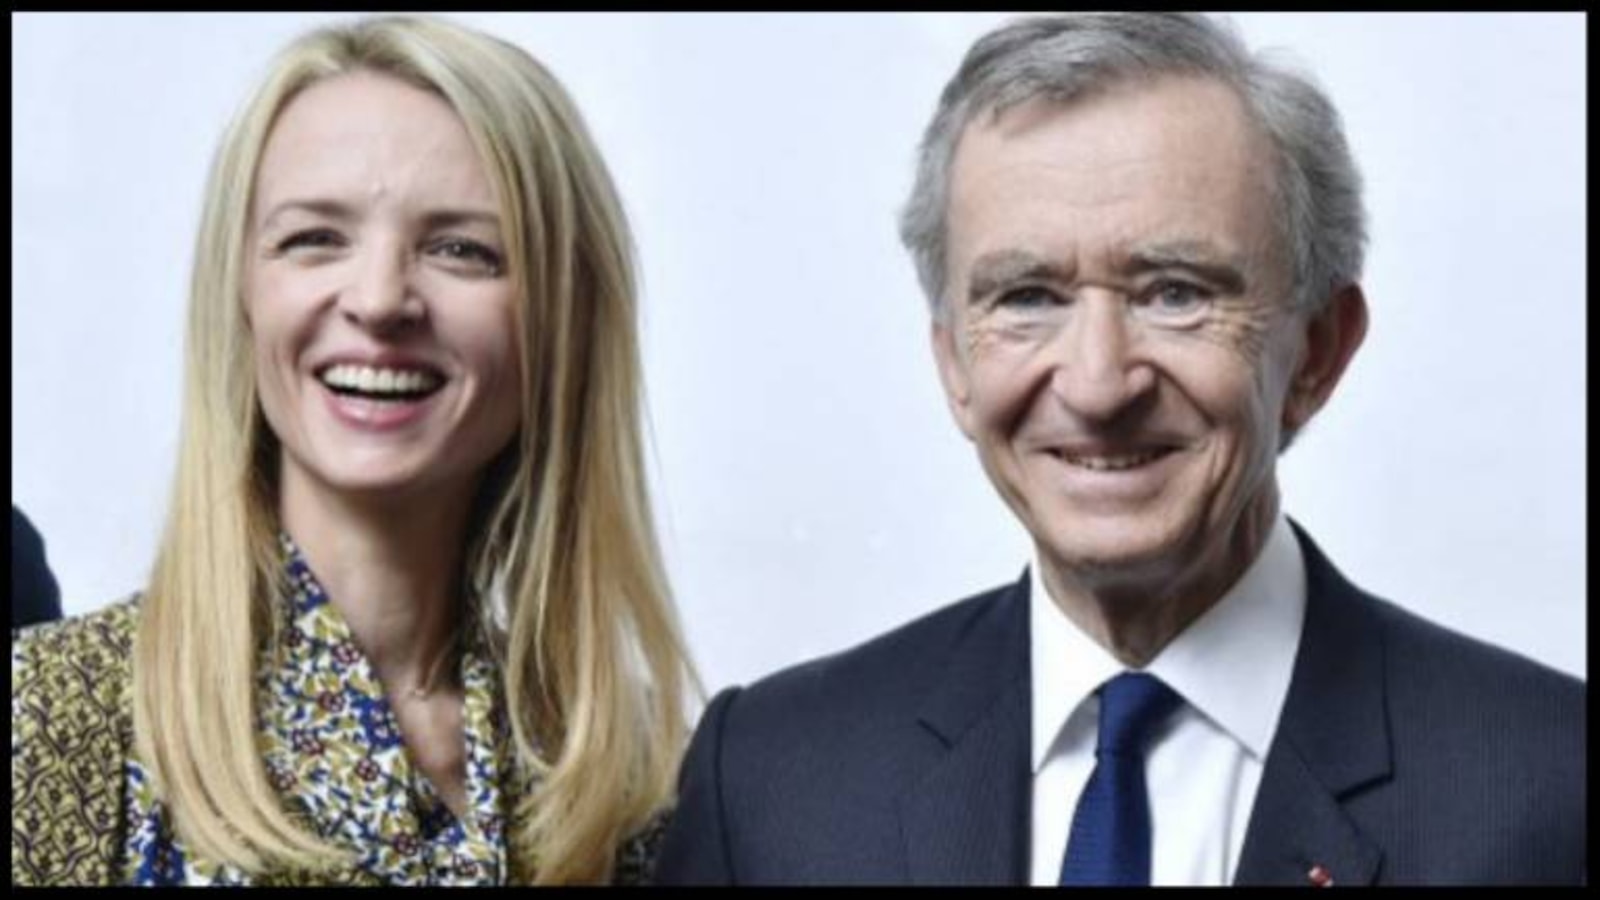 LVMH: Delphine Arnault joins executive committee